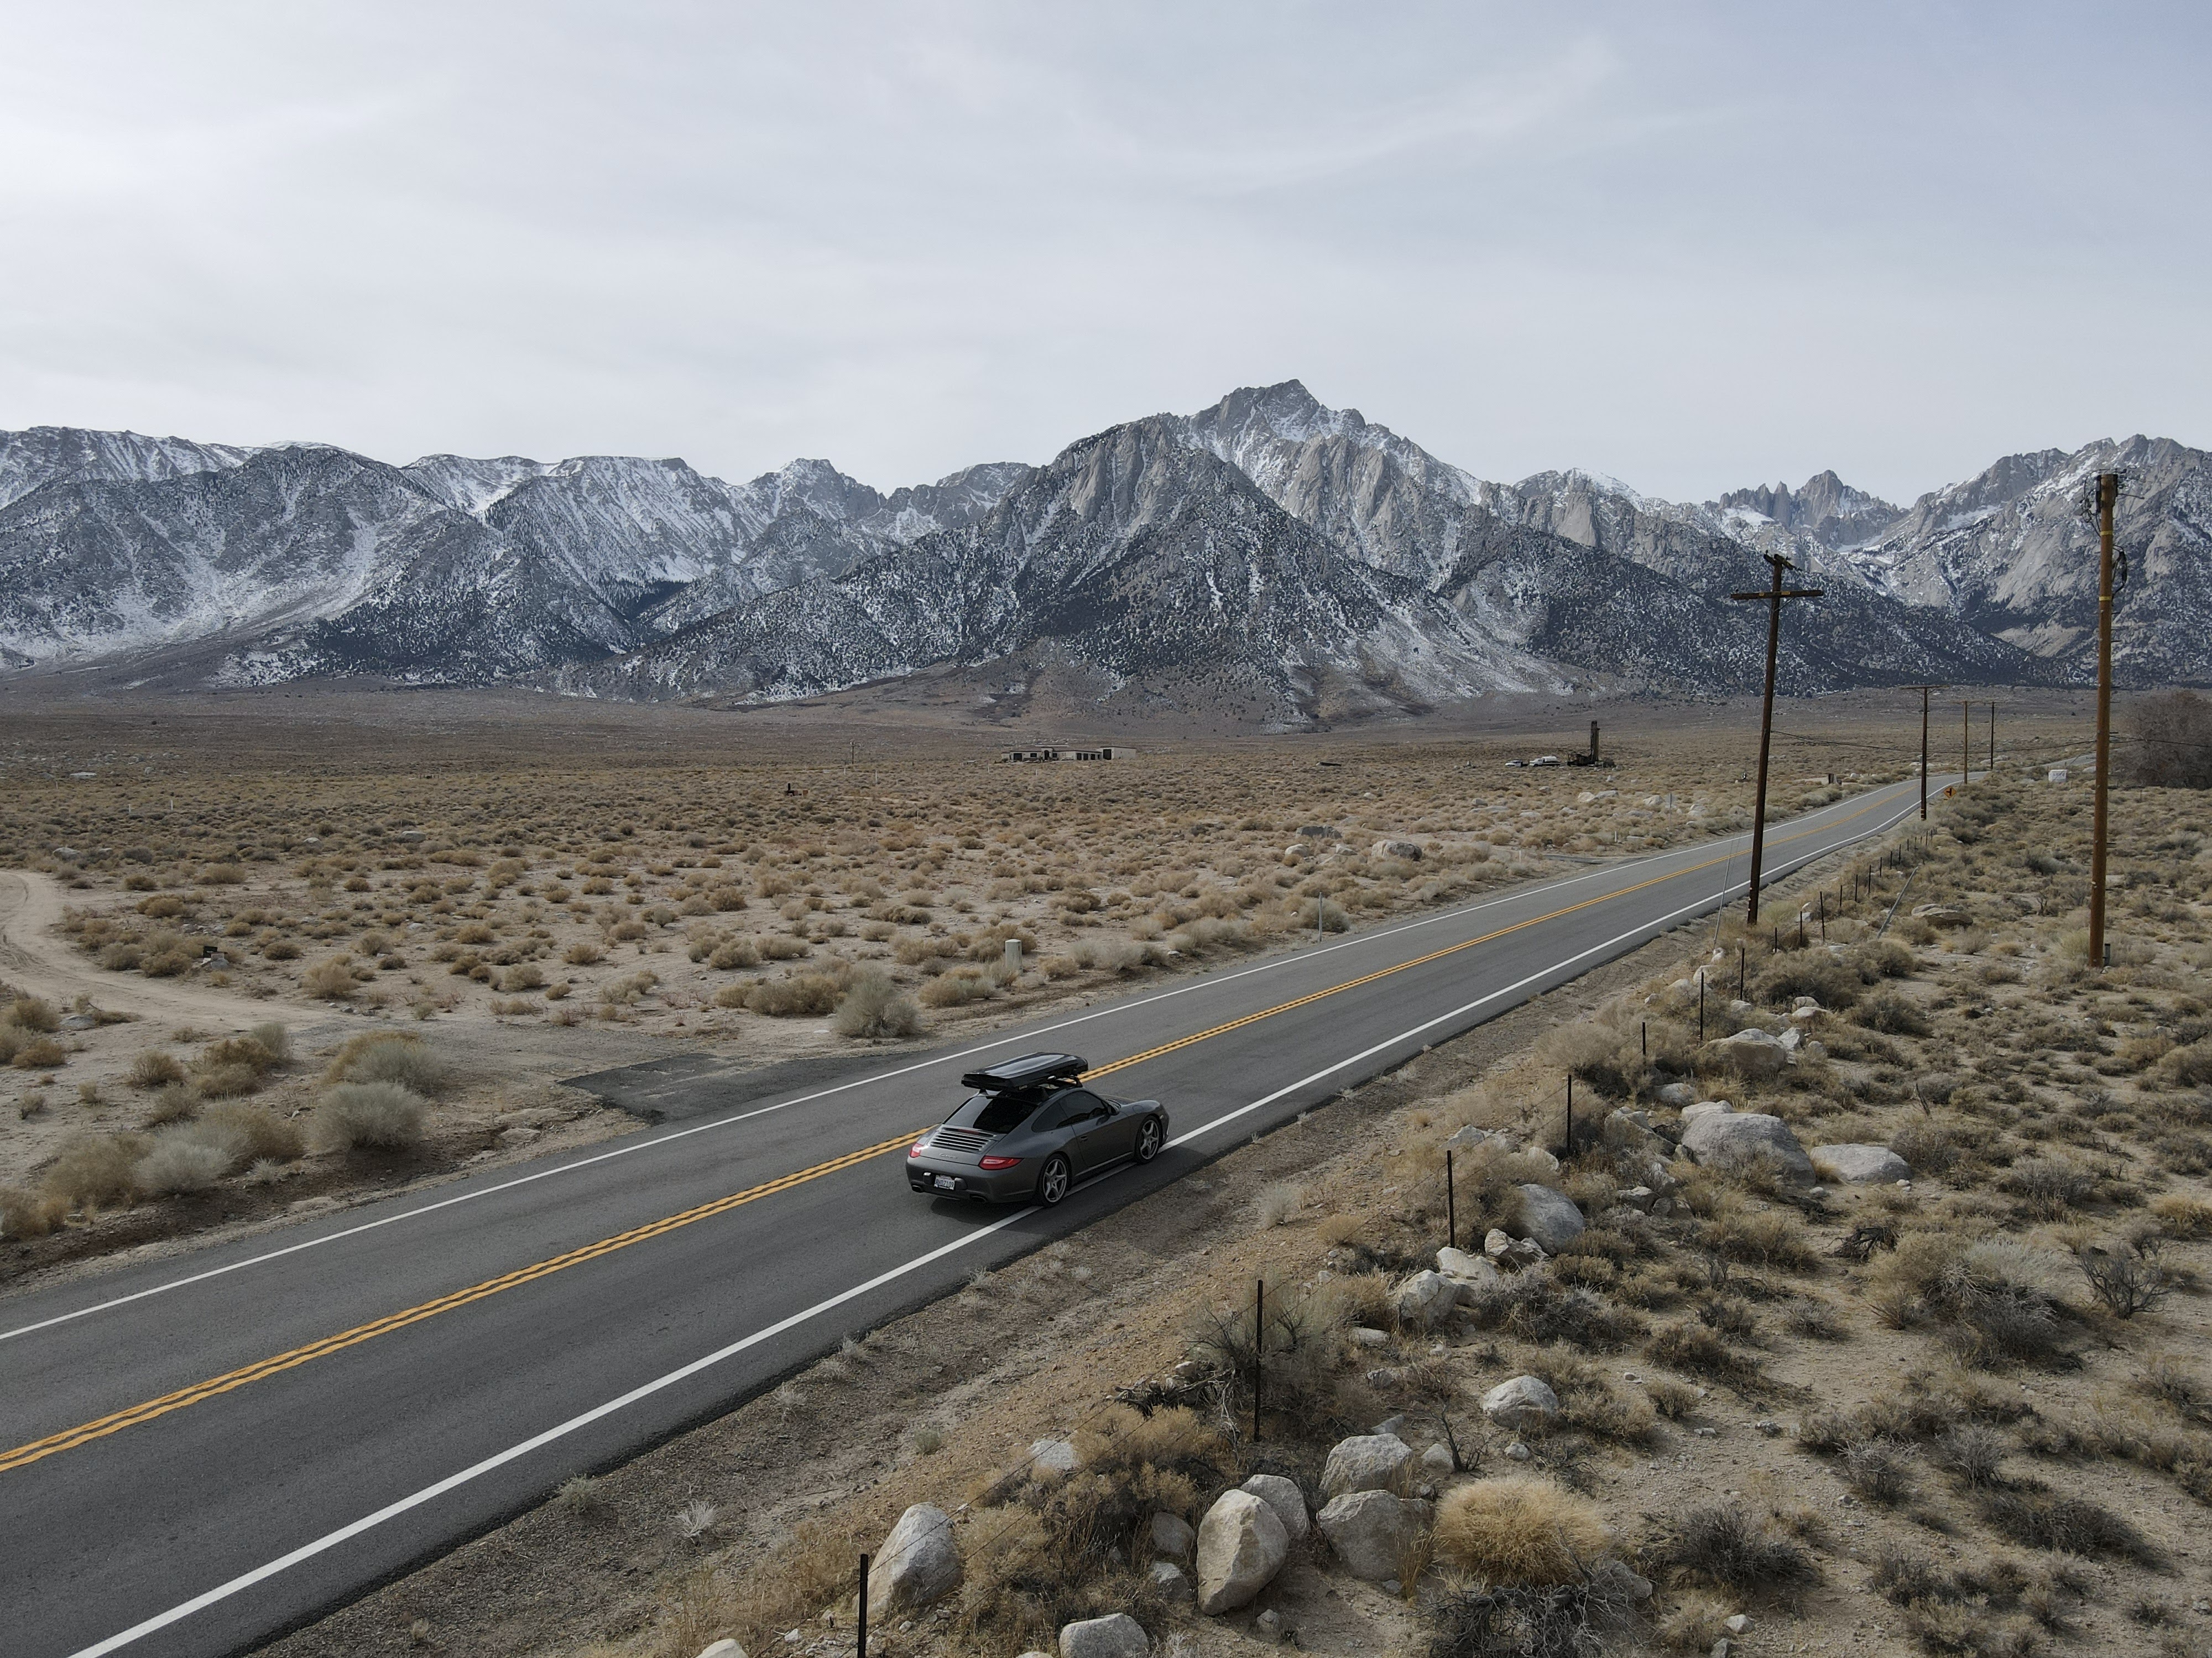 Porsche 911 (type 997) on road, Mount Whitney in background